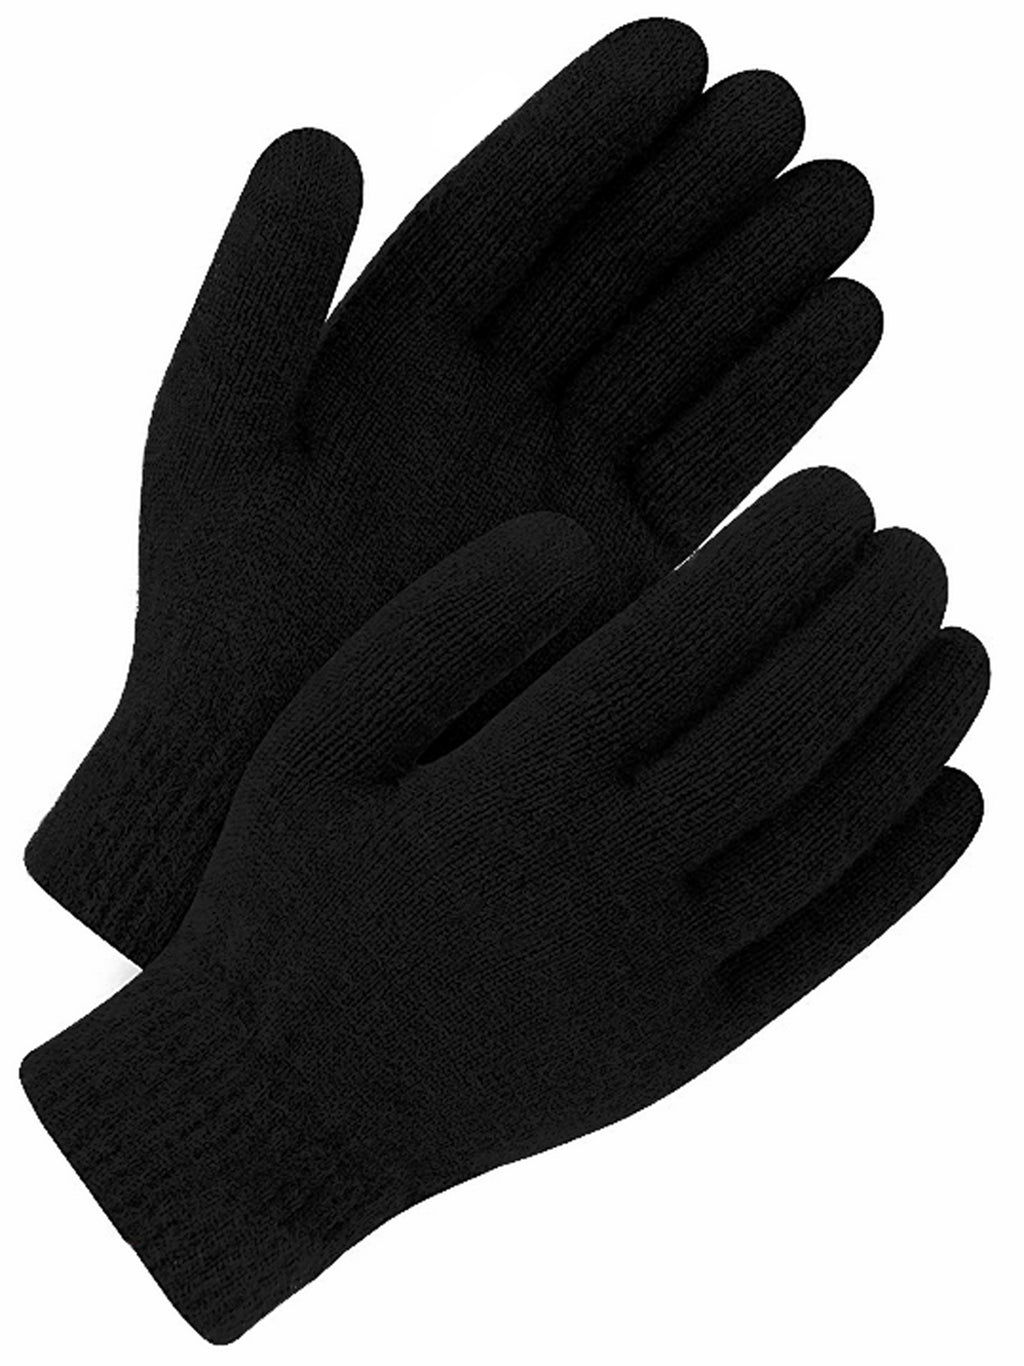 Mens Black Ultra Thermal Insulated Winter Heated Gloves